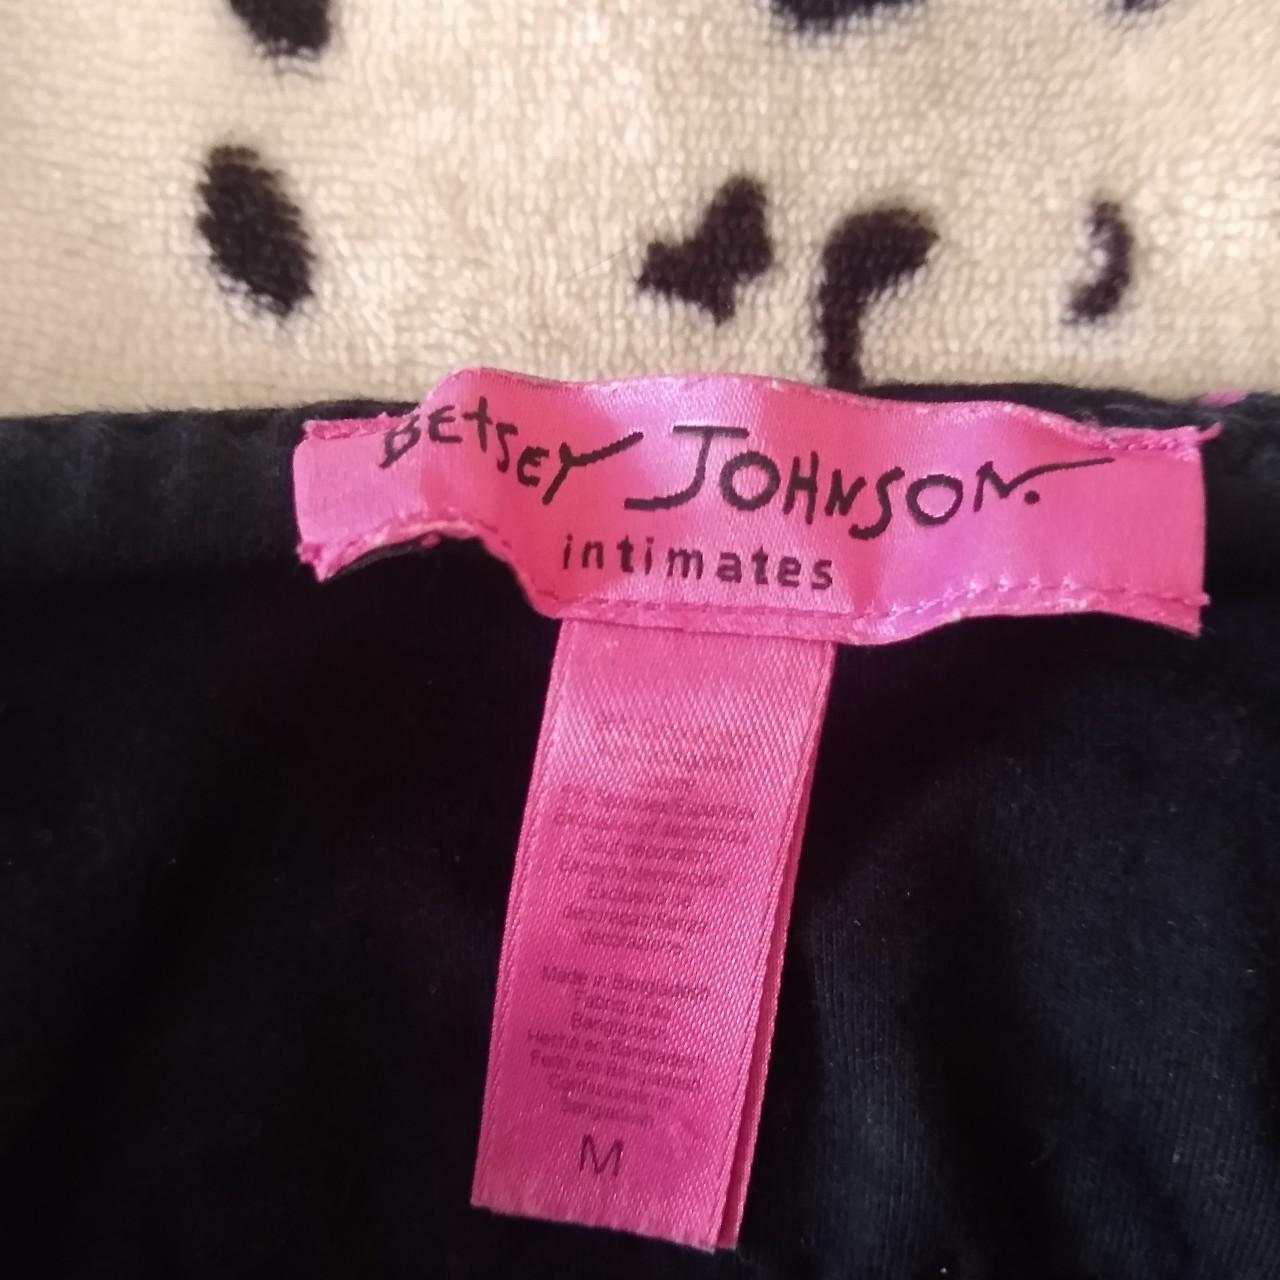 Product Image 3 - Vintage Betsey Johnson camisole. Covered